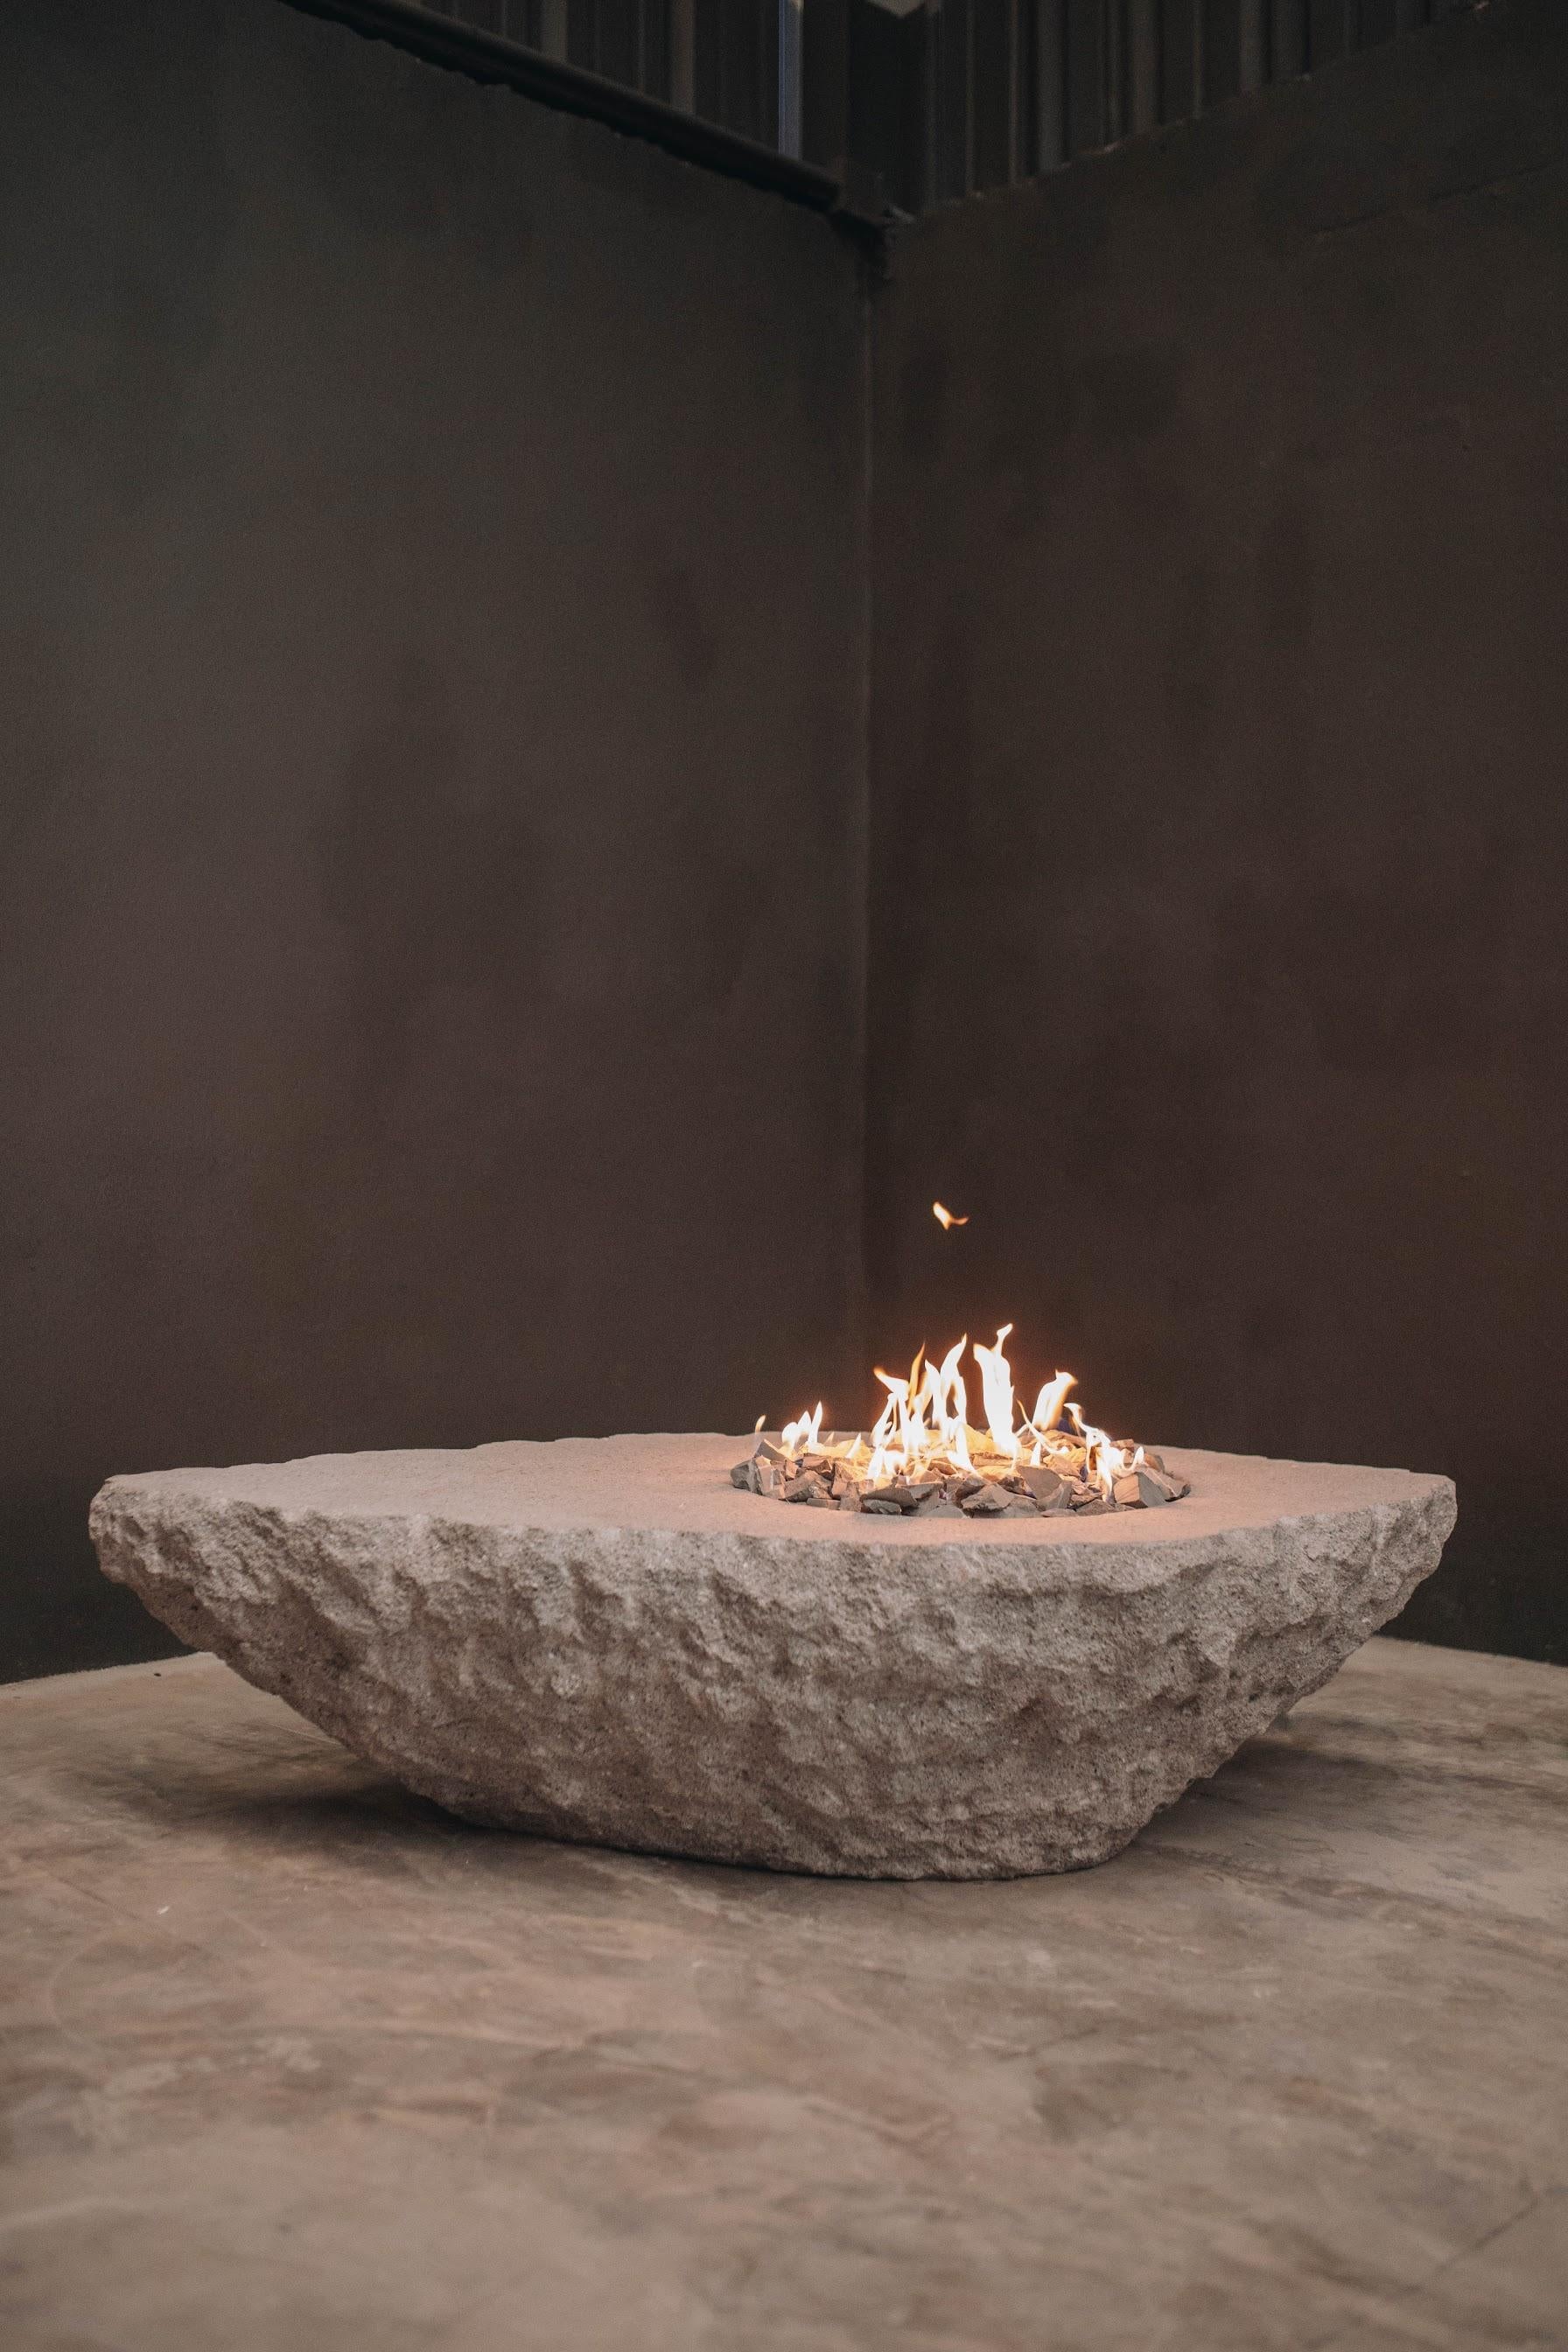 Prometheo Uno Fire Table by Andres Monnier
Dimensions: D 160 x W 100 x H 40 H cm.
Materials: Grey Quarry stone.

Prometeo fire table is a piece inspired by the myth of Prometheus, of the Greek mythology.
Prometheus was a titan who stole the fire